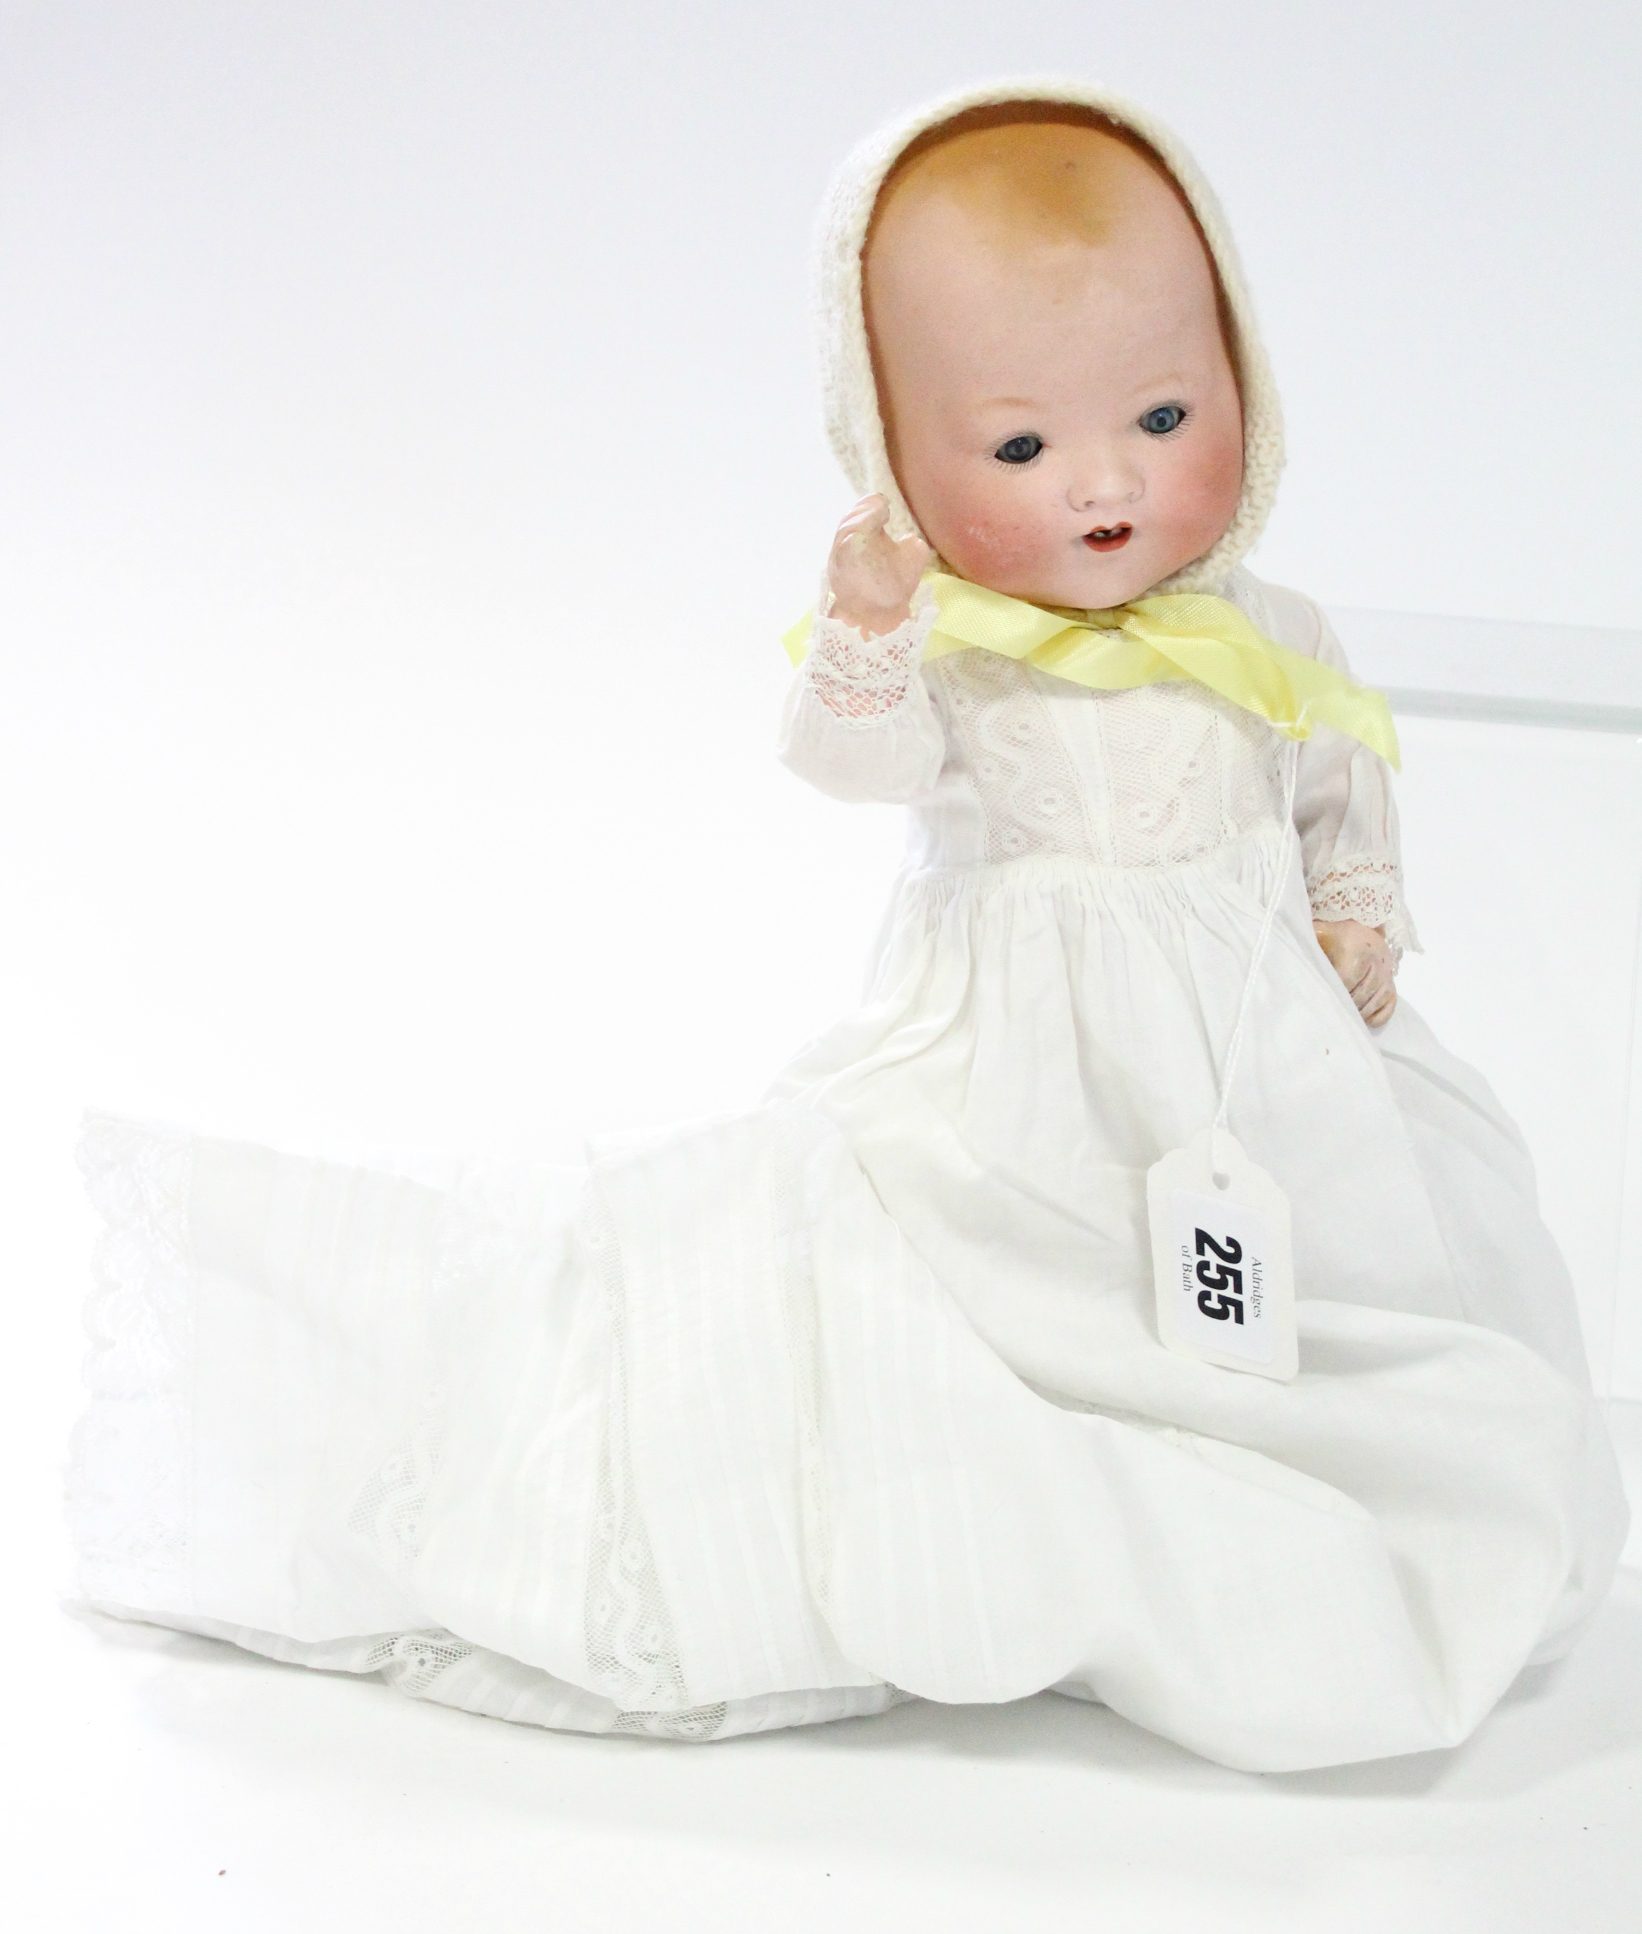 An early 20th century Armand Marseille bisque head “My Dream Baby” doll (A.M. Germany 351/2½ K) with